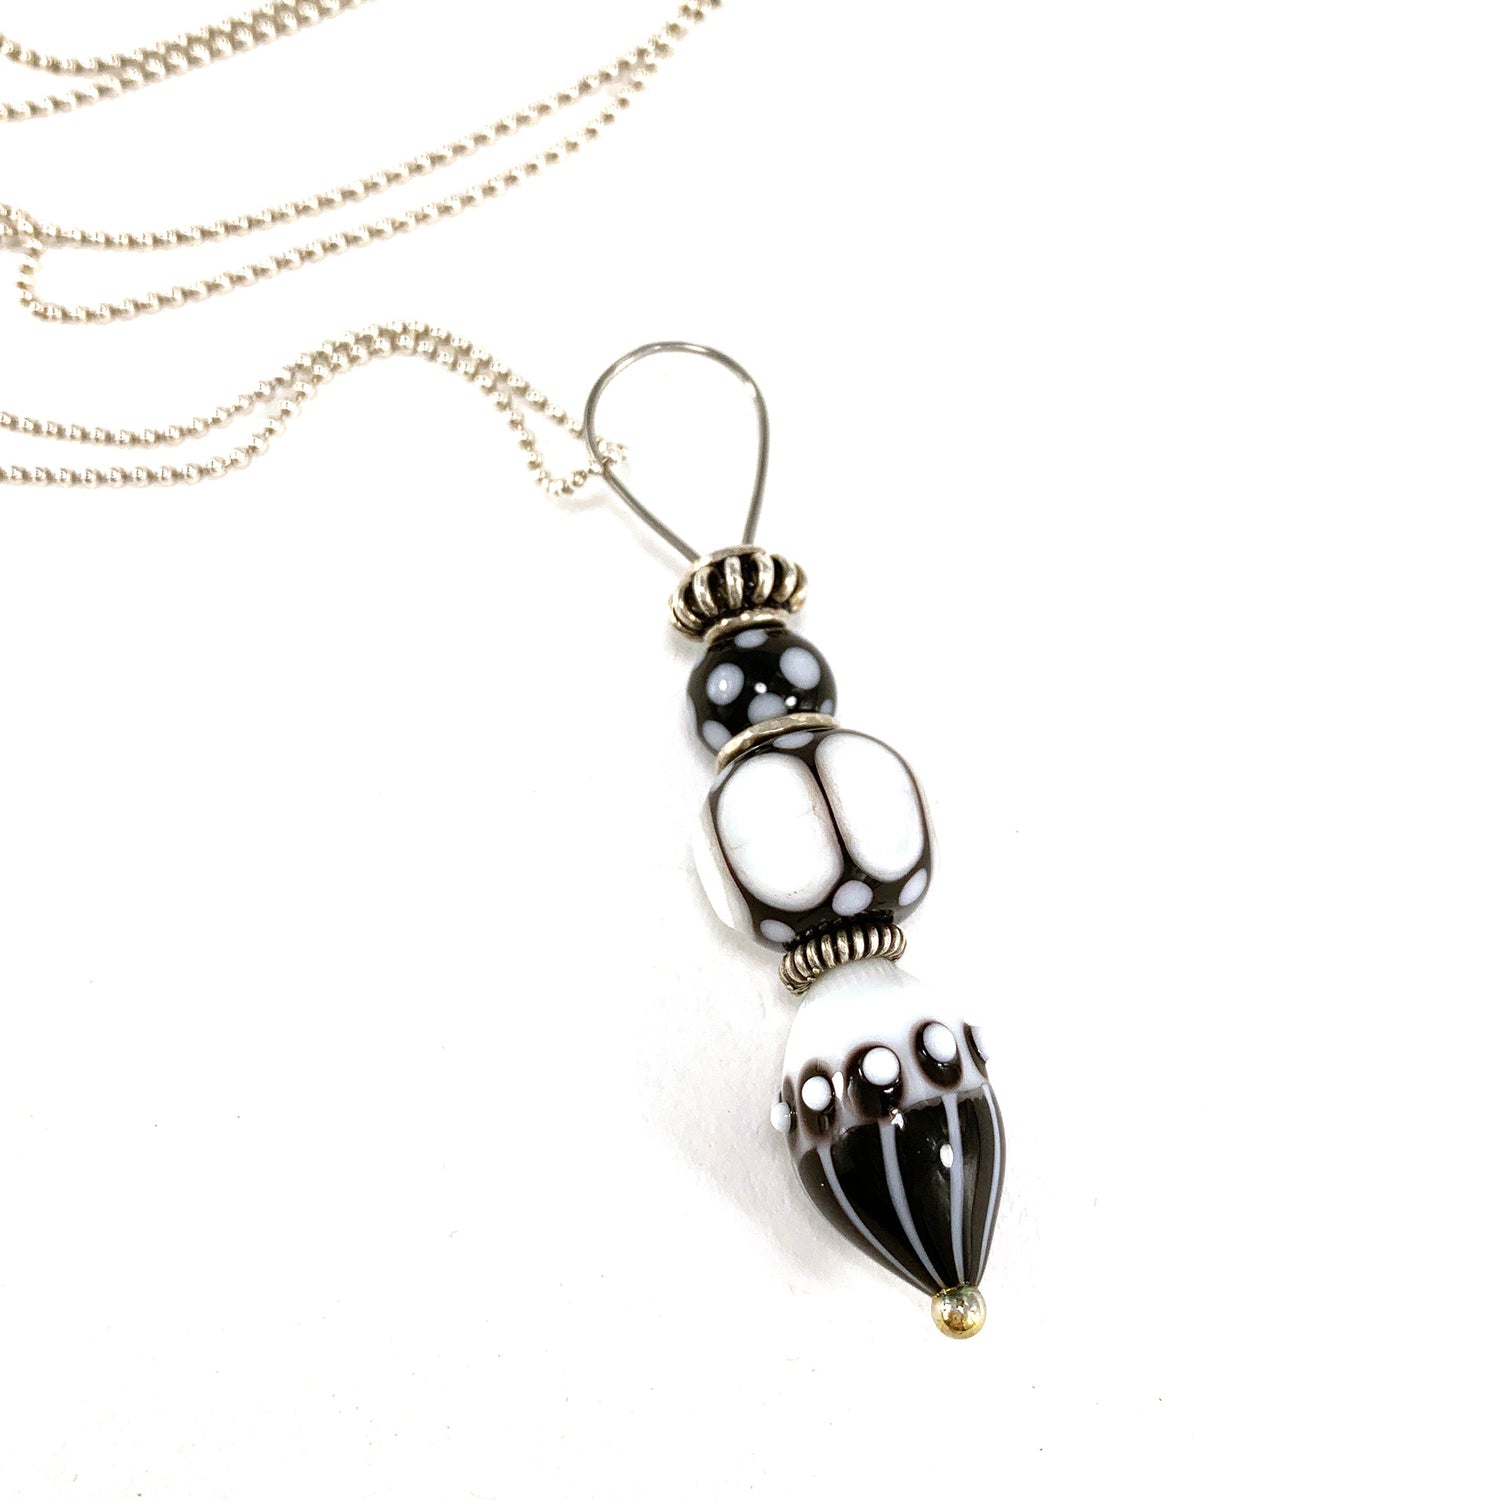 Stacked Bead Pendant in Black and White